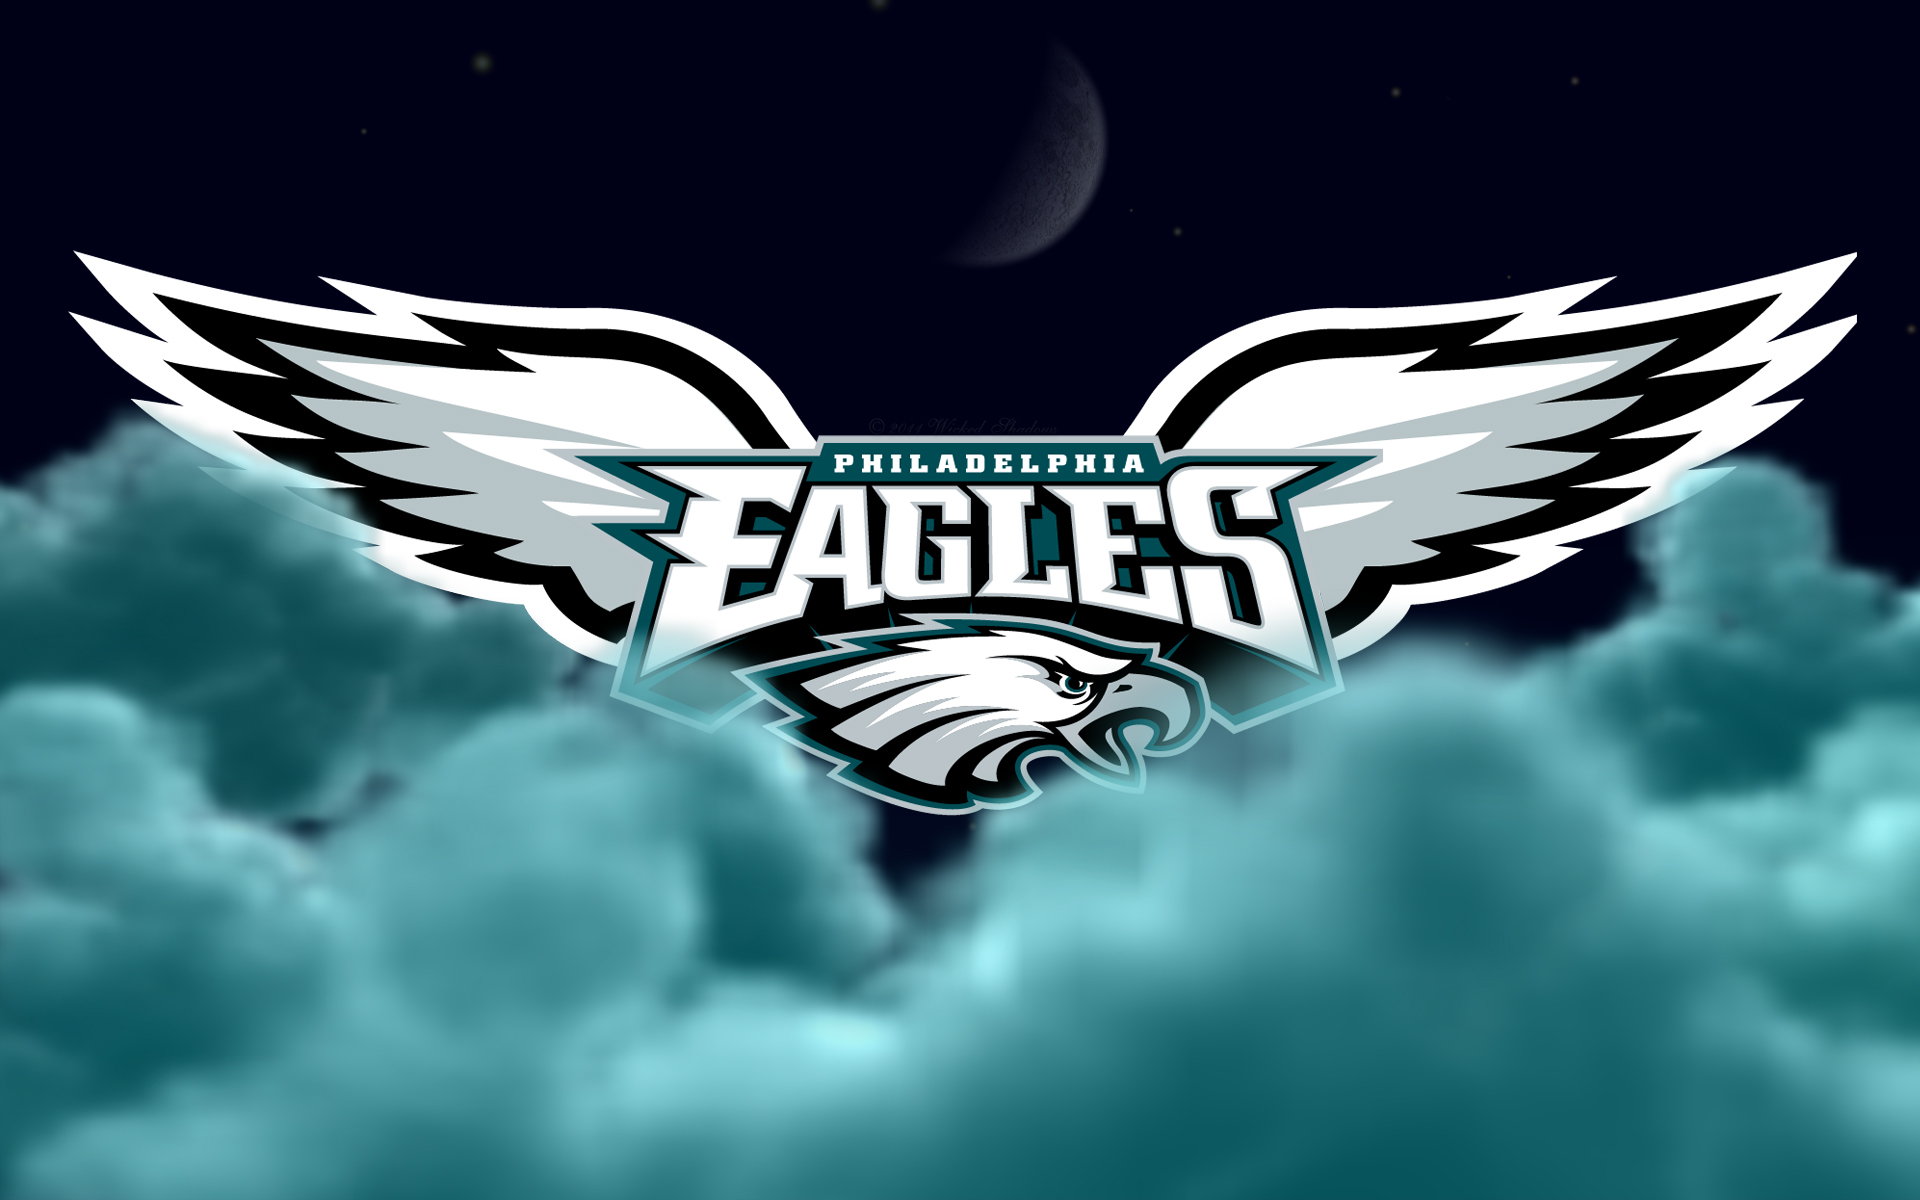 Philadelphia Eagles Hd Wallpapers   Pictures   Hd Wallpapers